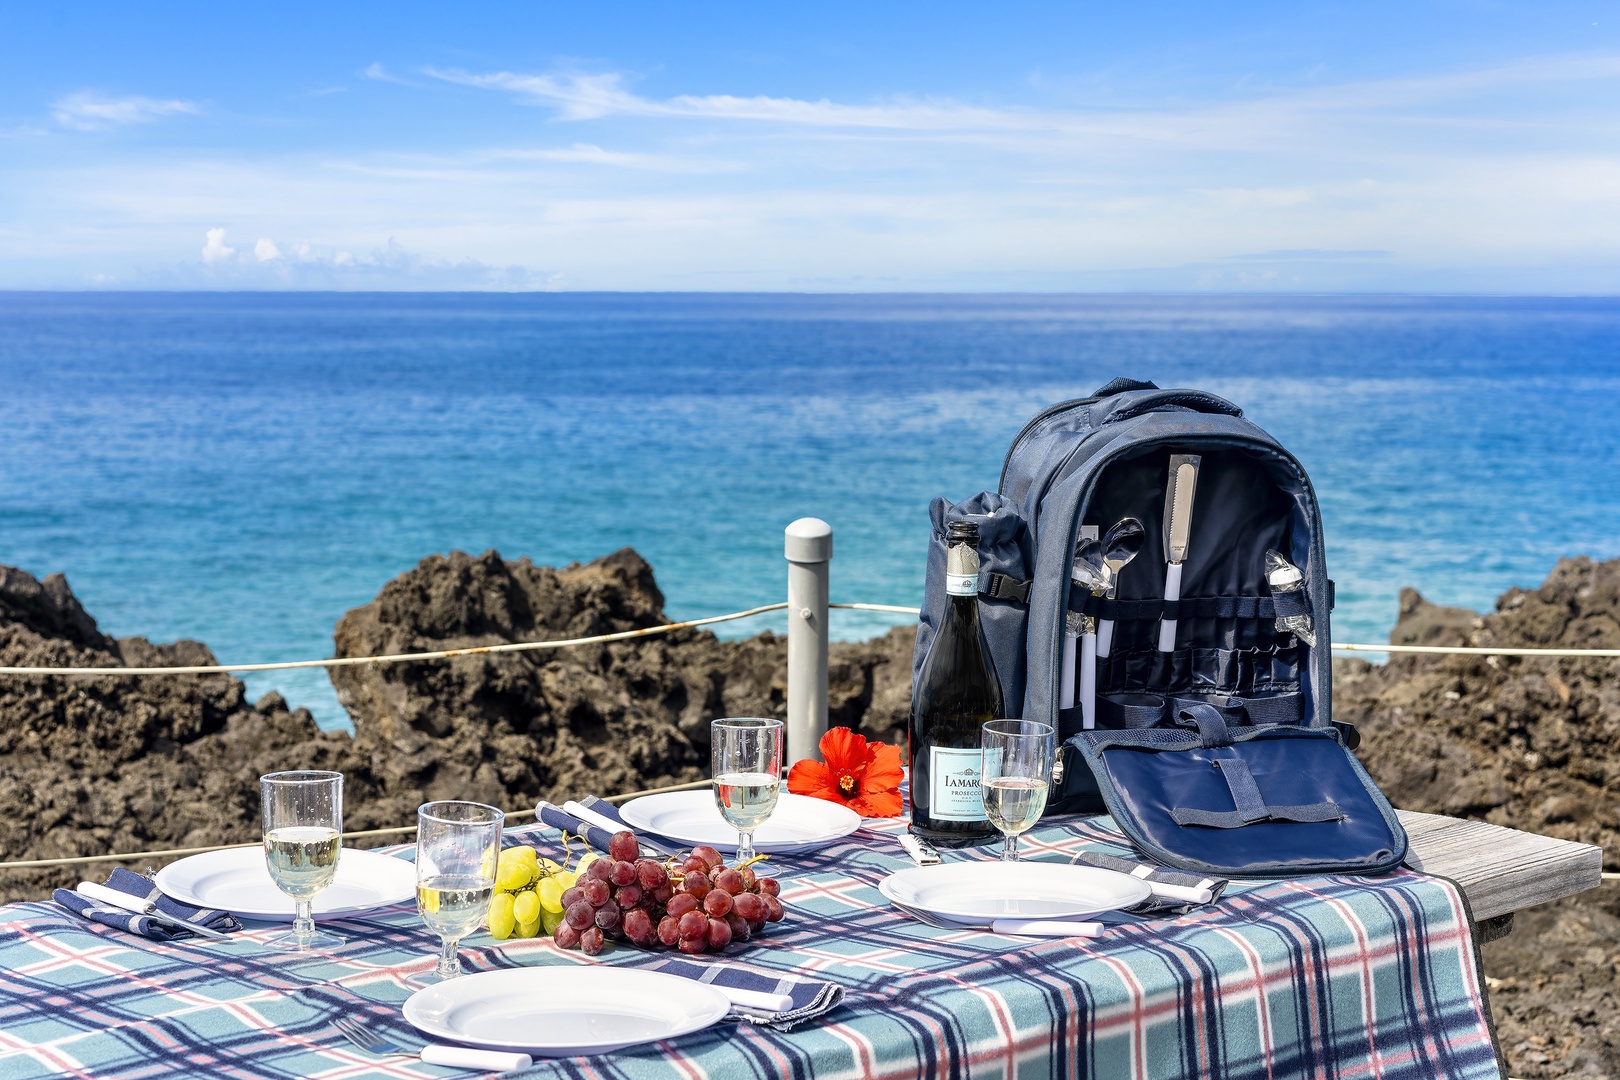 Kailua Kona Vacation Rentals, Keauhou Kona Surf & Racquet 9303 - Picnic case is included in your rental to enjoy with your family